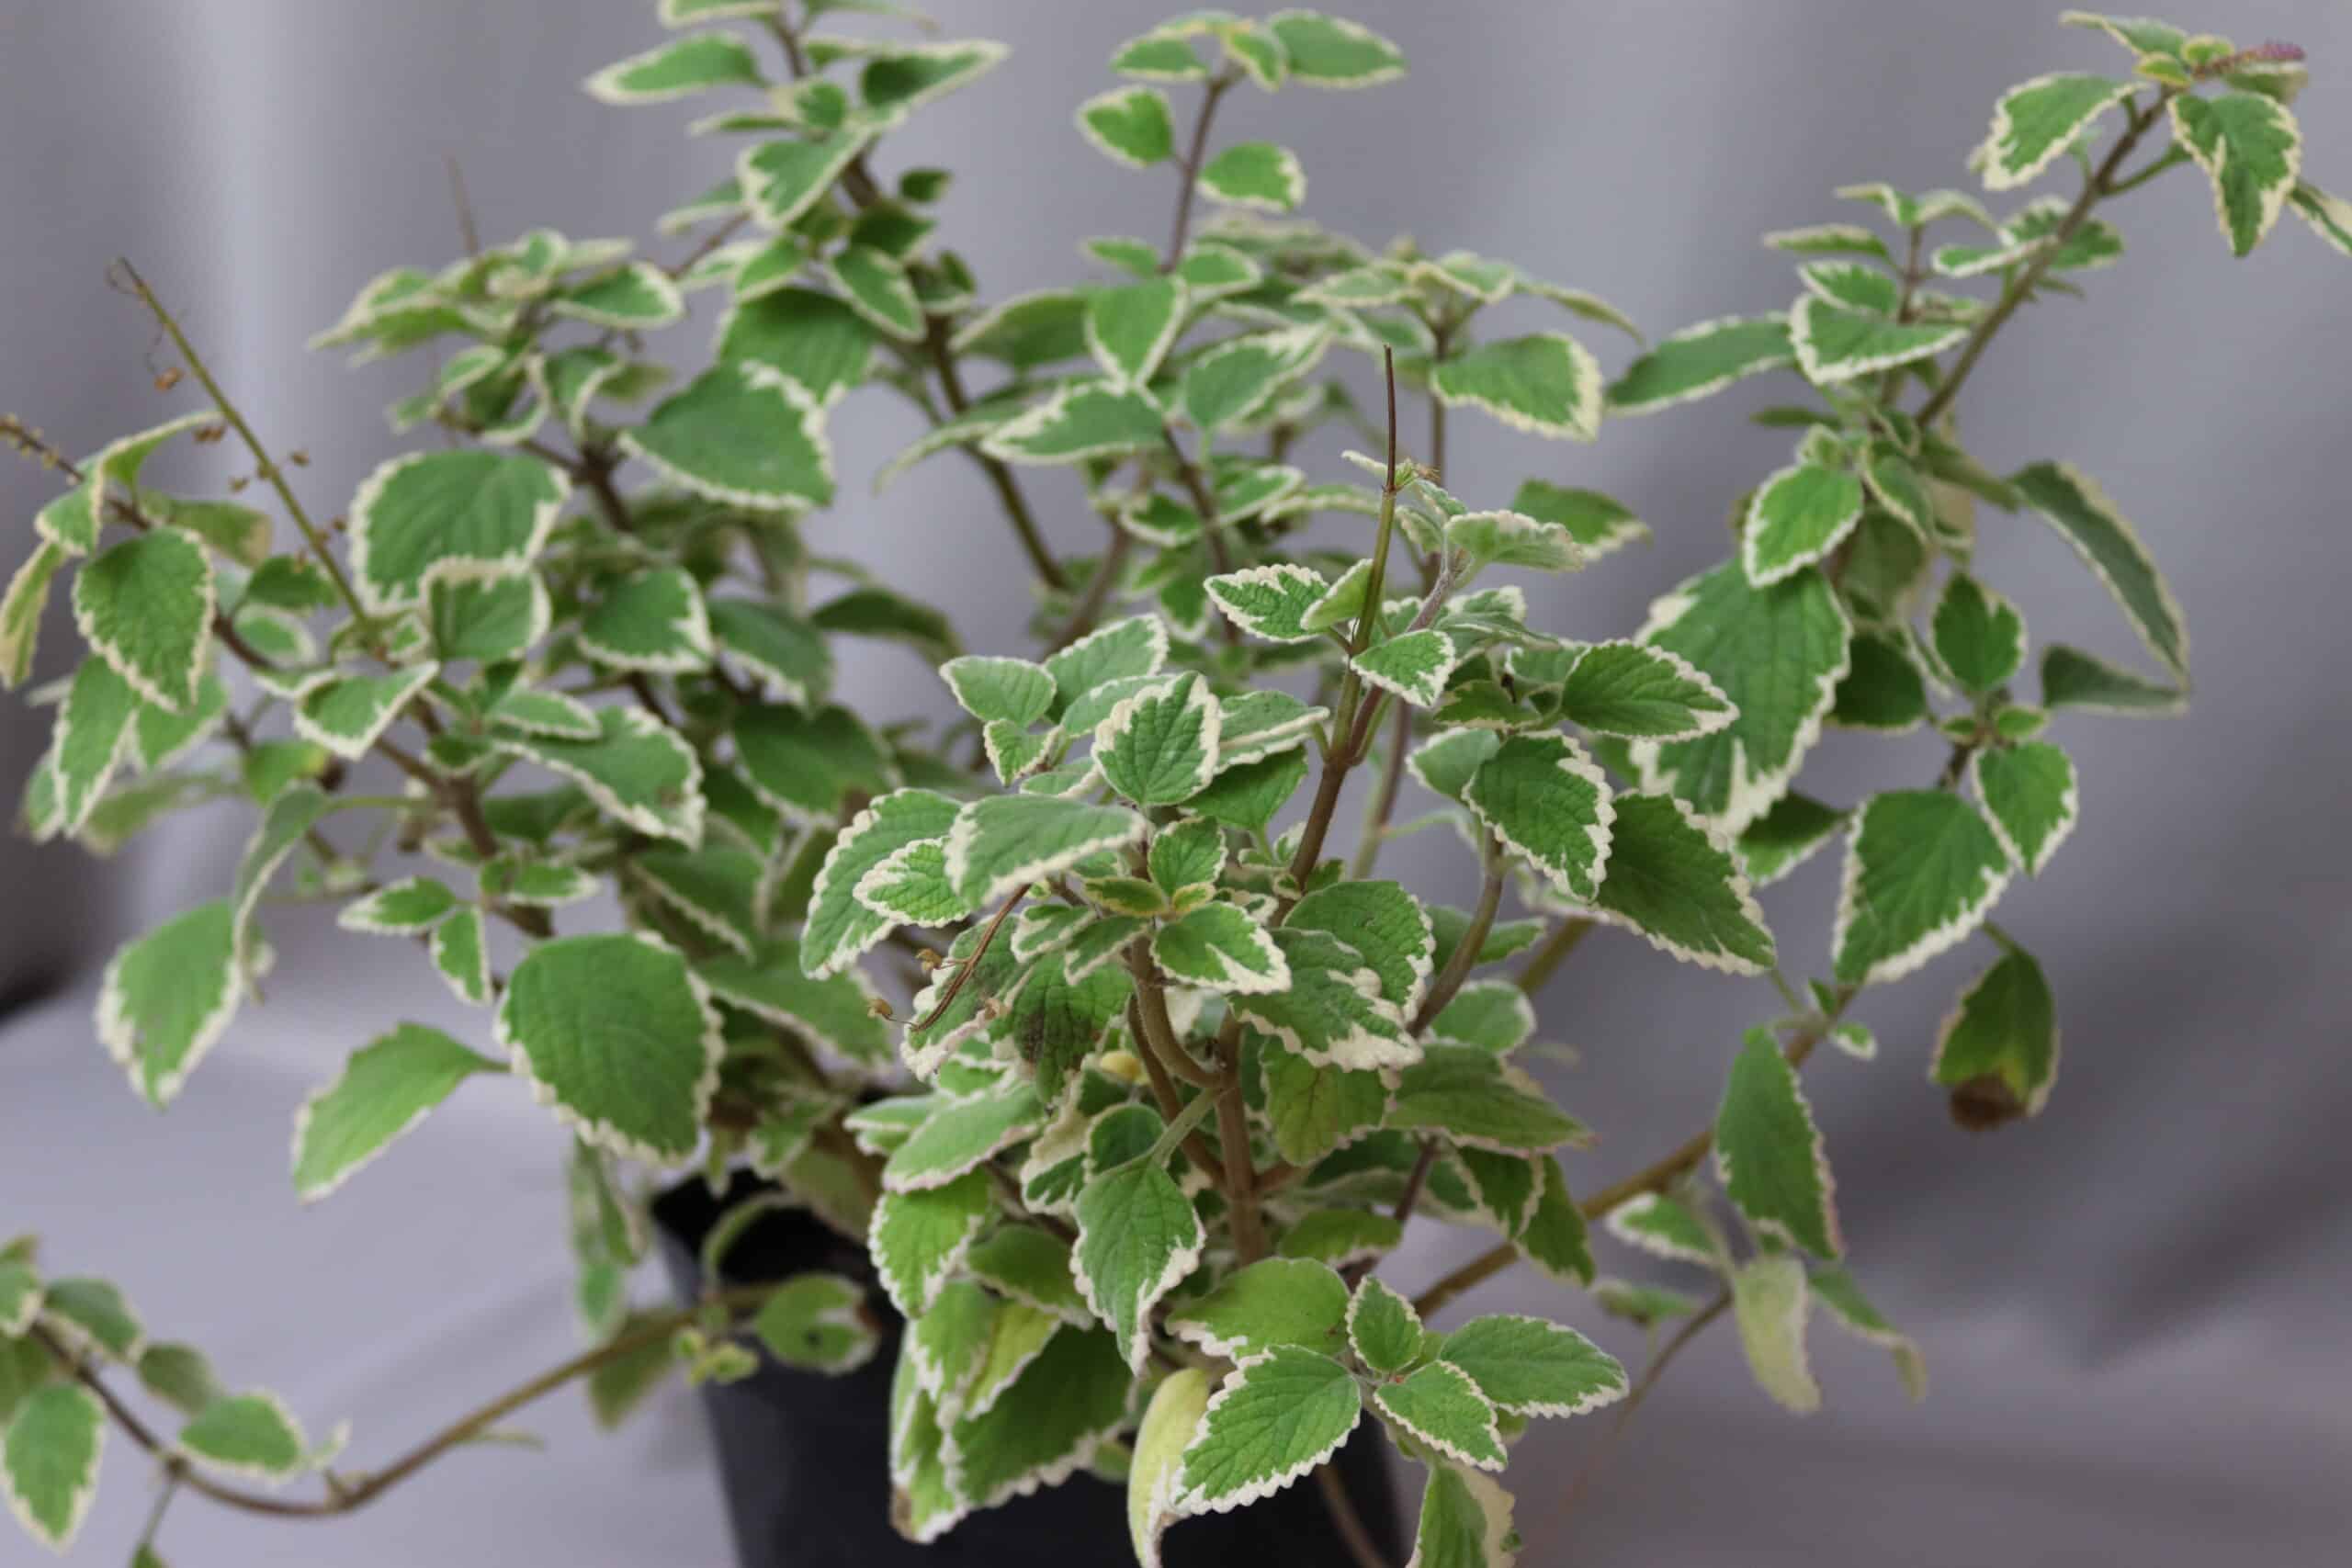 A potted variegated Plectranthus plant with green and white variegated leaves on thin stems.